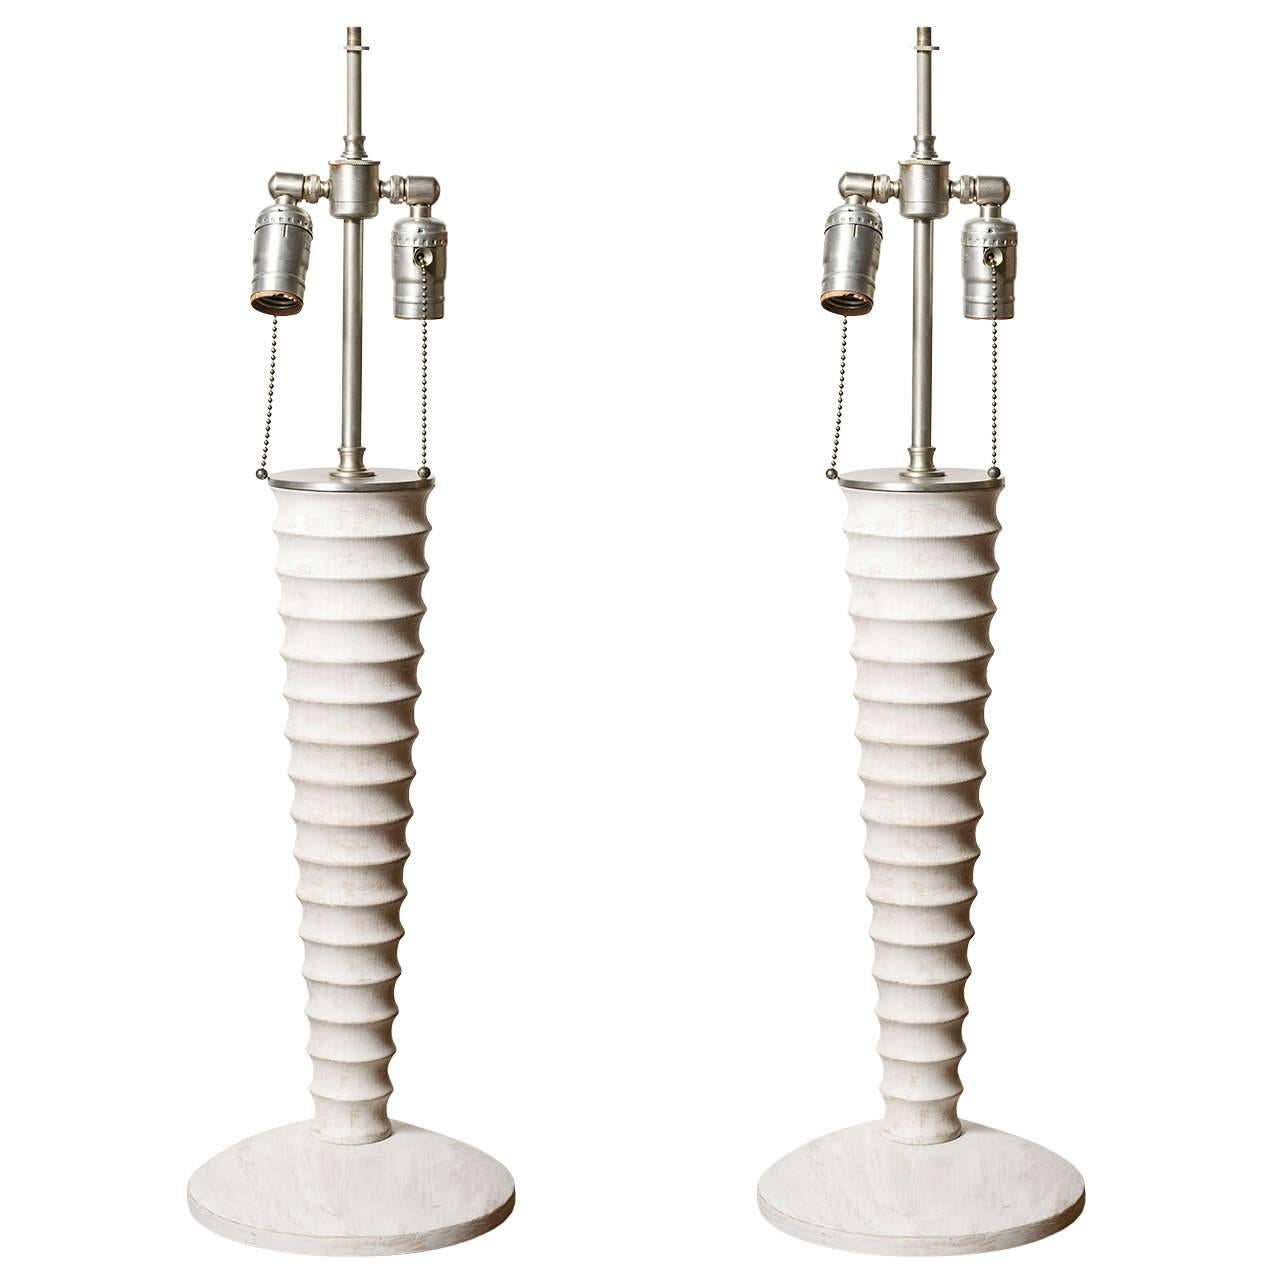 Pair of White-Washed Turned Wood Lamps